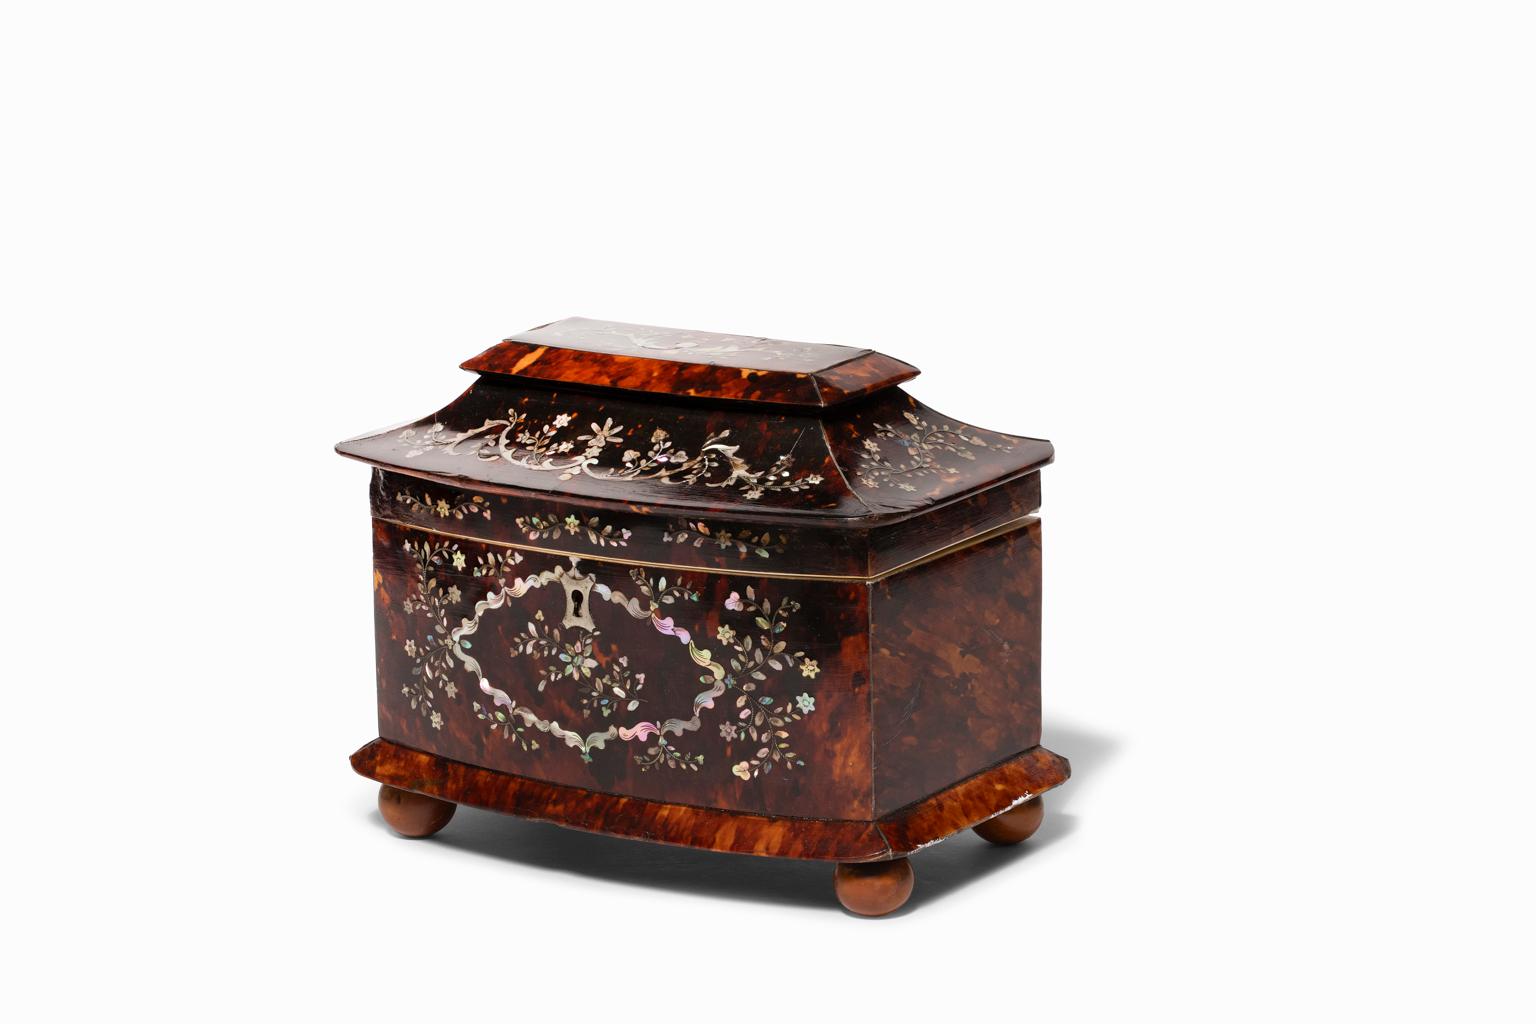 SALE ONE WEEK ONLY

Regency Mother-of-Pearl Inlaid Tortoiseshell Tea Caddy from the 1st quarter of the 19th century. It has a sarcophagus form with hinged cover opening to disclose two lidded compartments. The top and front are elaborately inlaid